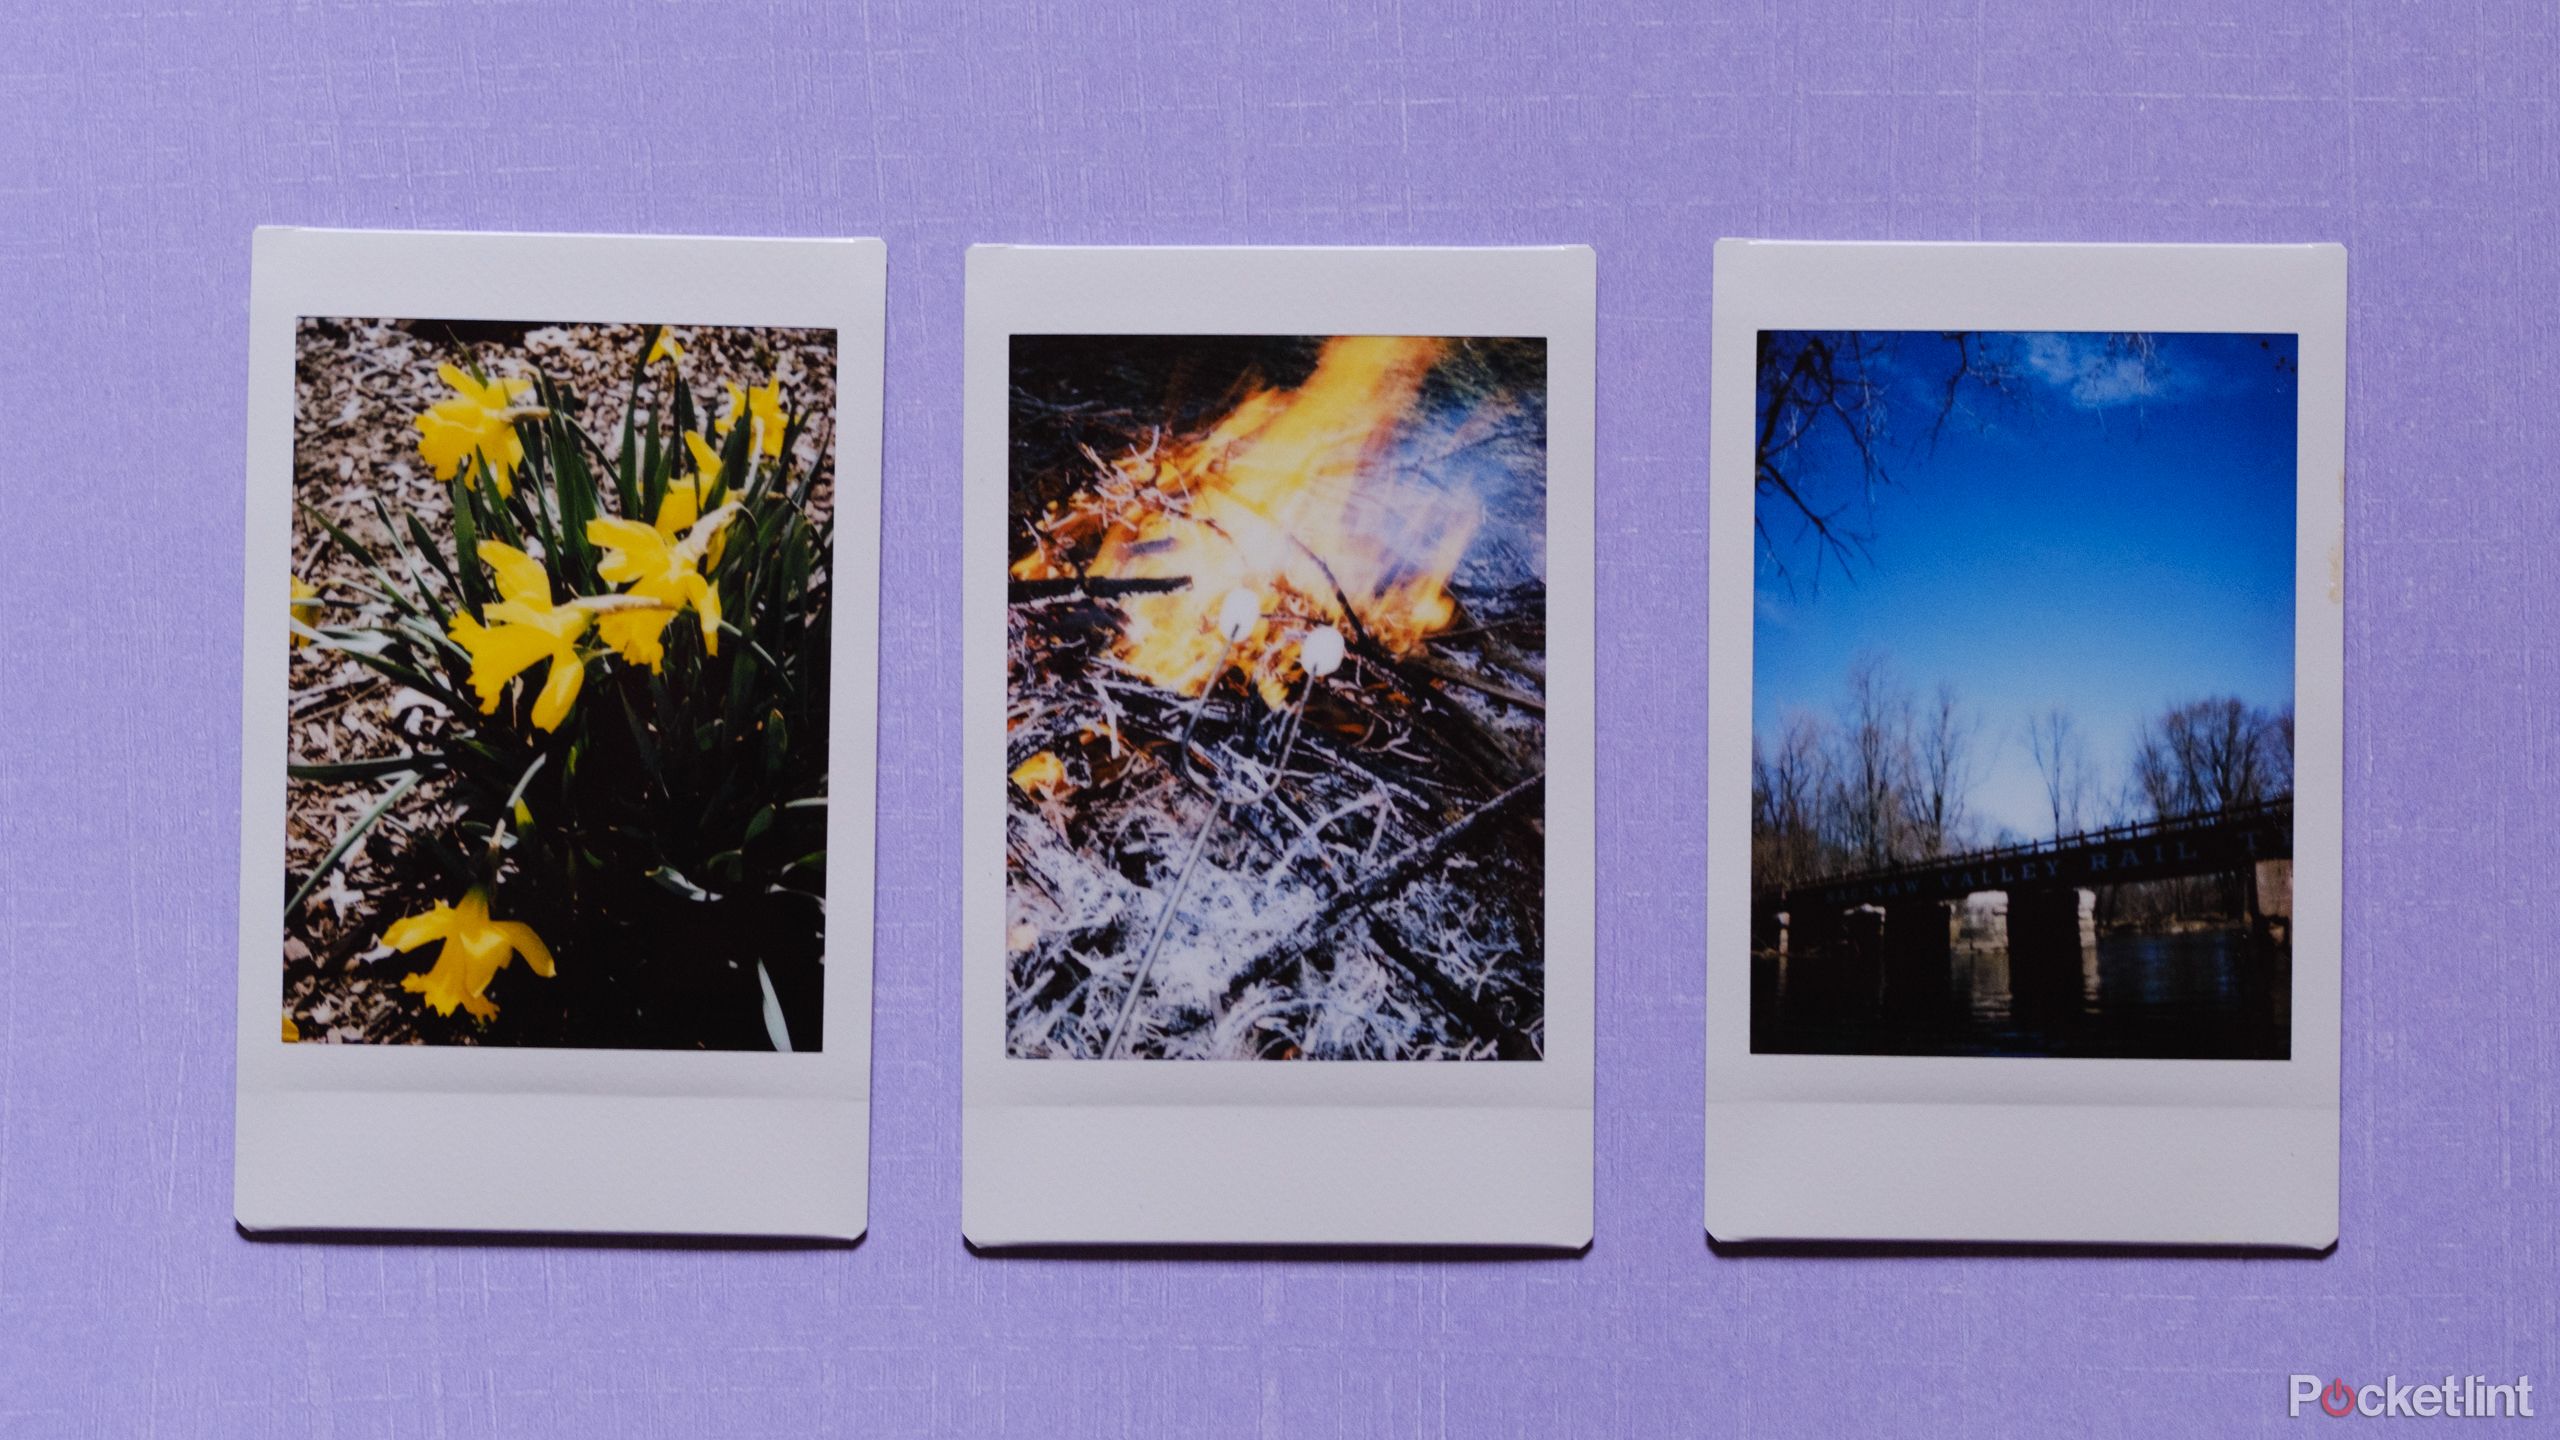 A photo of instant film from the Fujifilm Instax Mini 12